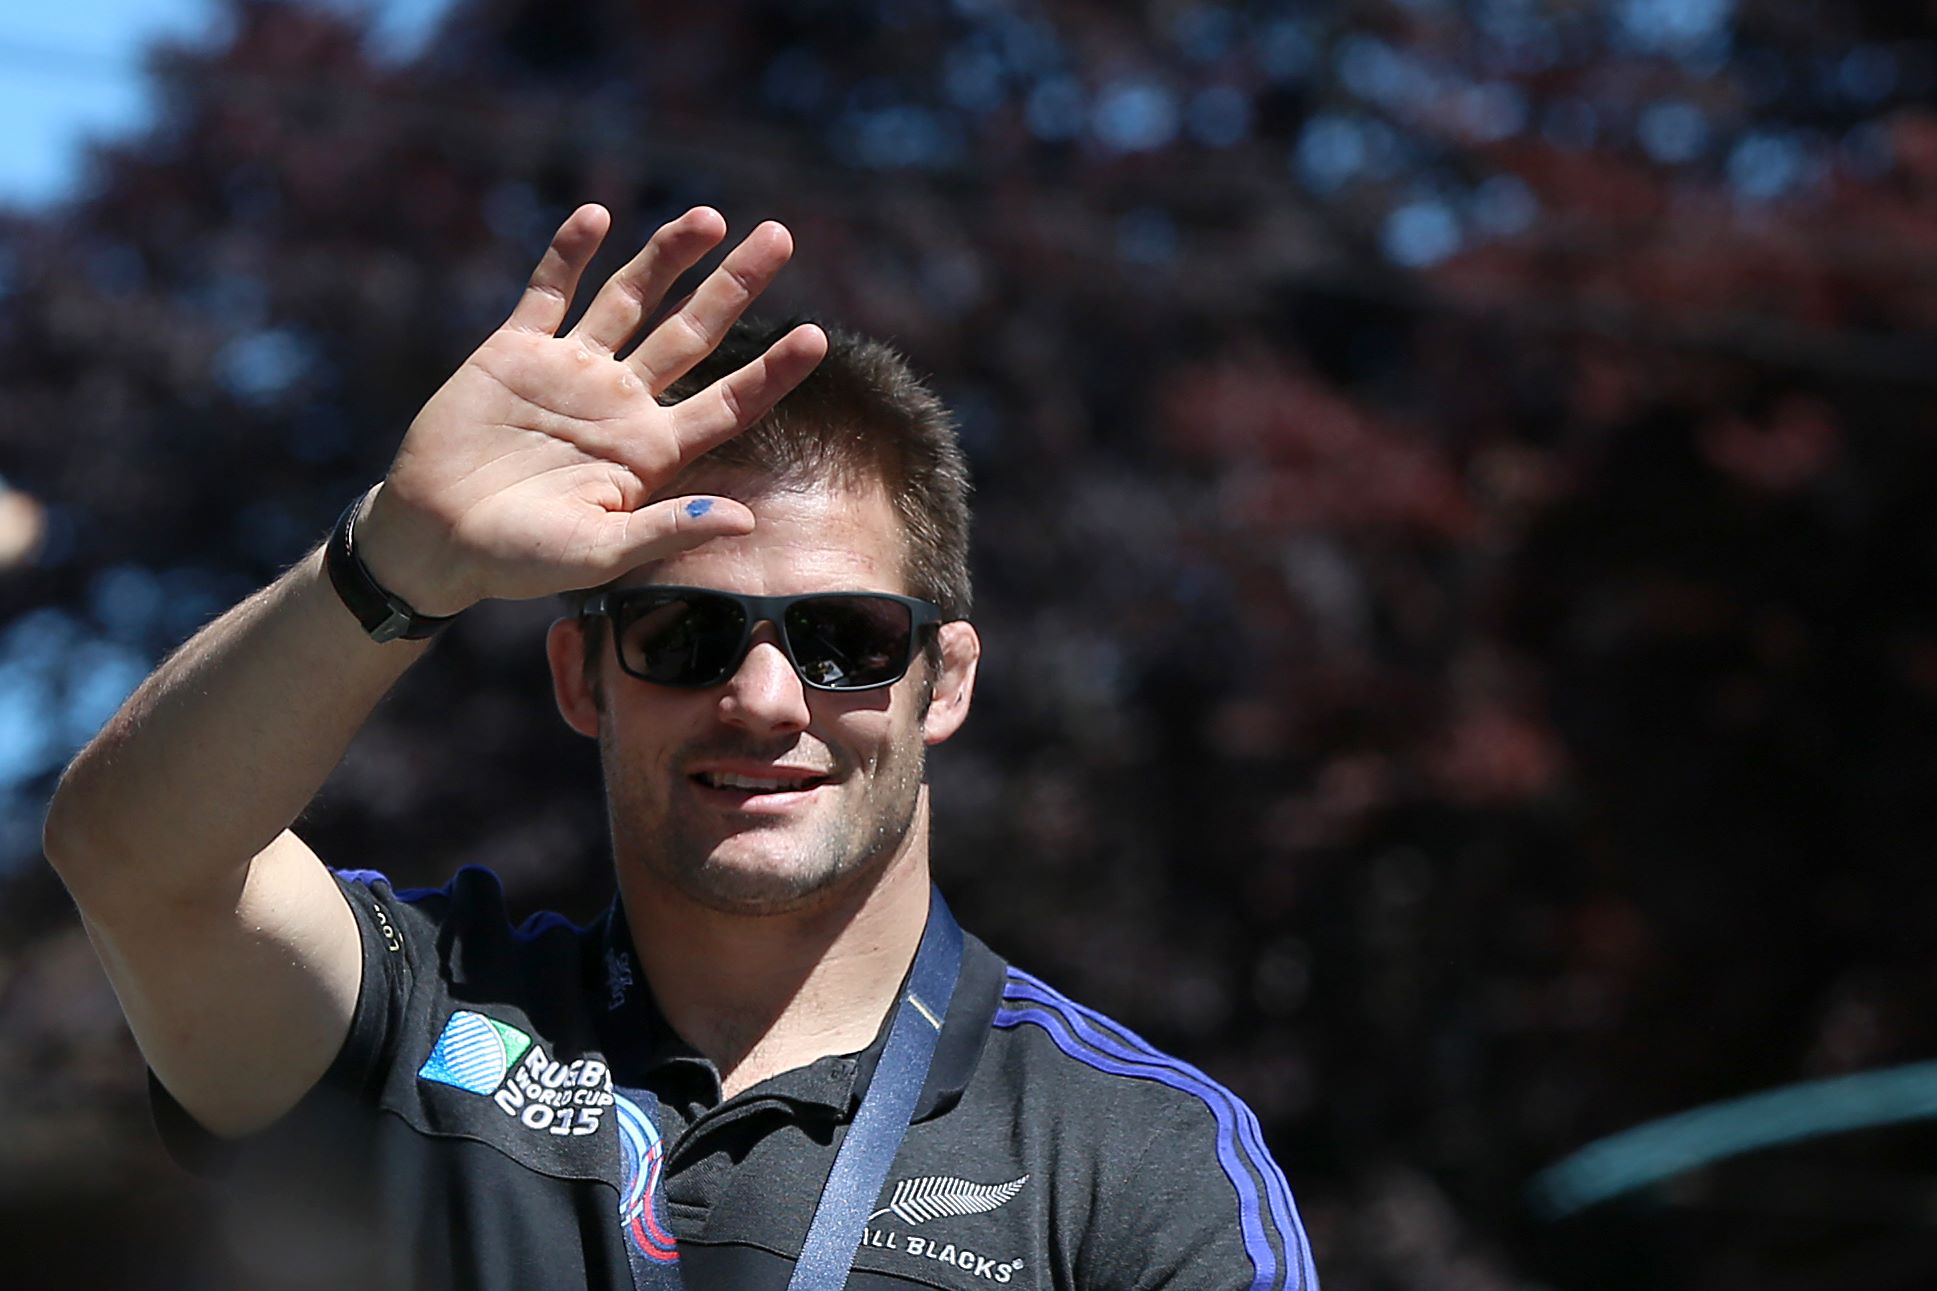 (FILES) - A file picture taken on November 5, 2015, New Zealand's All Blacks rugby team captain Richie McCaw arrives at an official welcome parade and reception for the team in Christchurch, following their Rugby World Cup win against Australia in England on October 31. All Black skipper Richie McCaw announced his retirement on November 18, 2015. AFP PHOTO / Fiona GOODALL